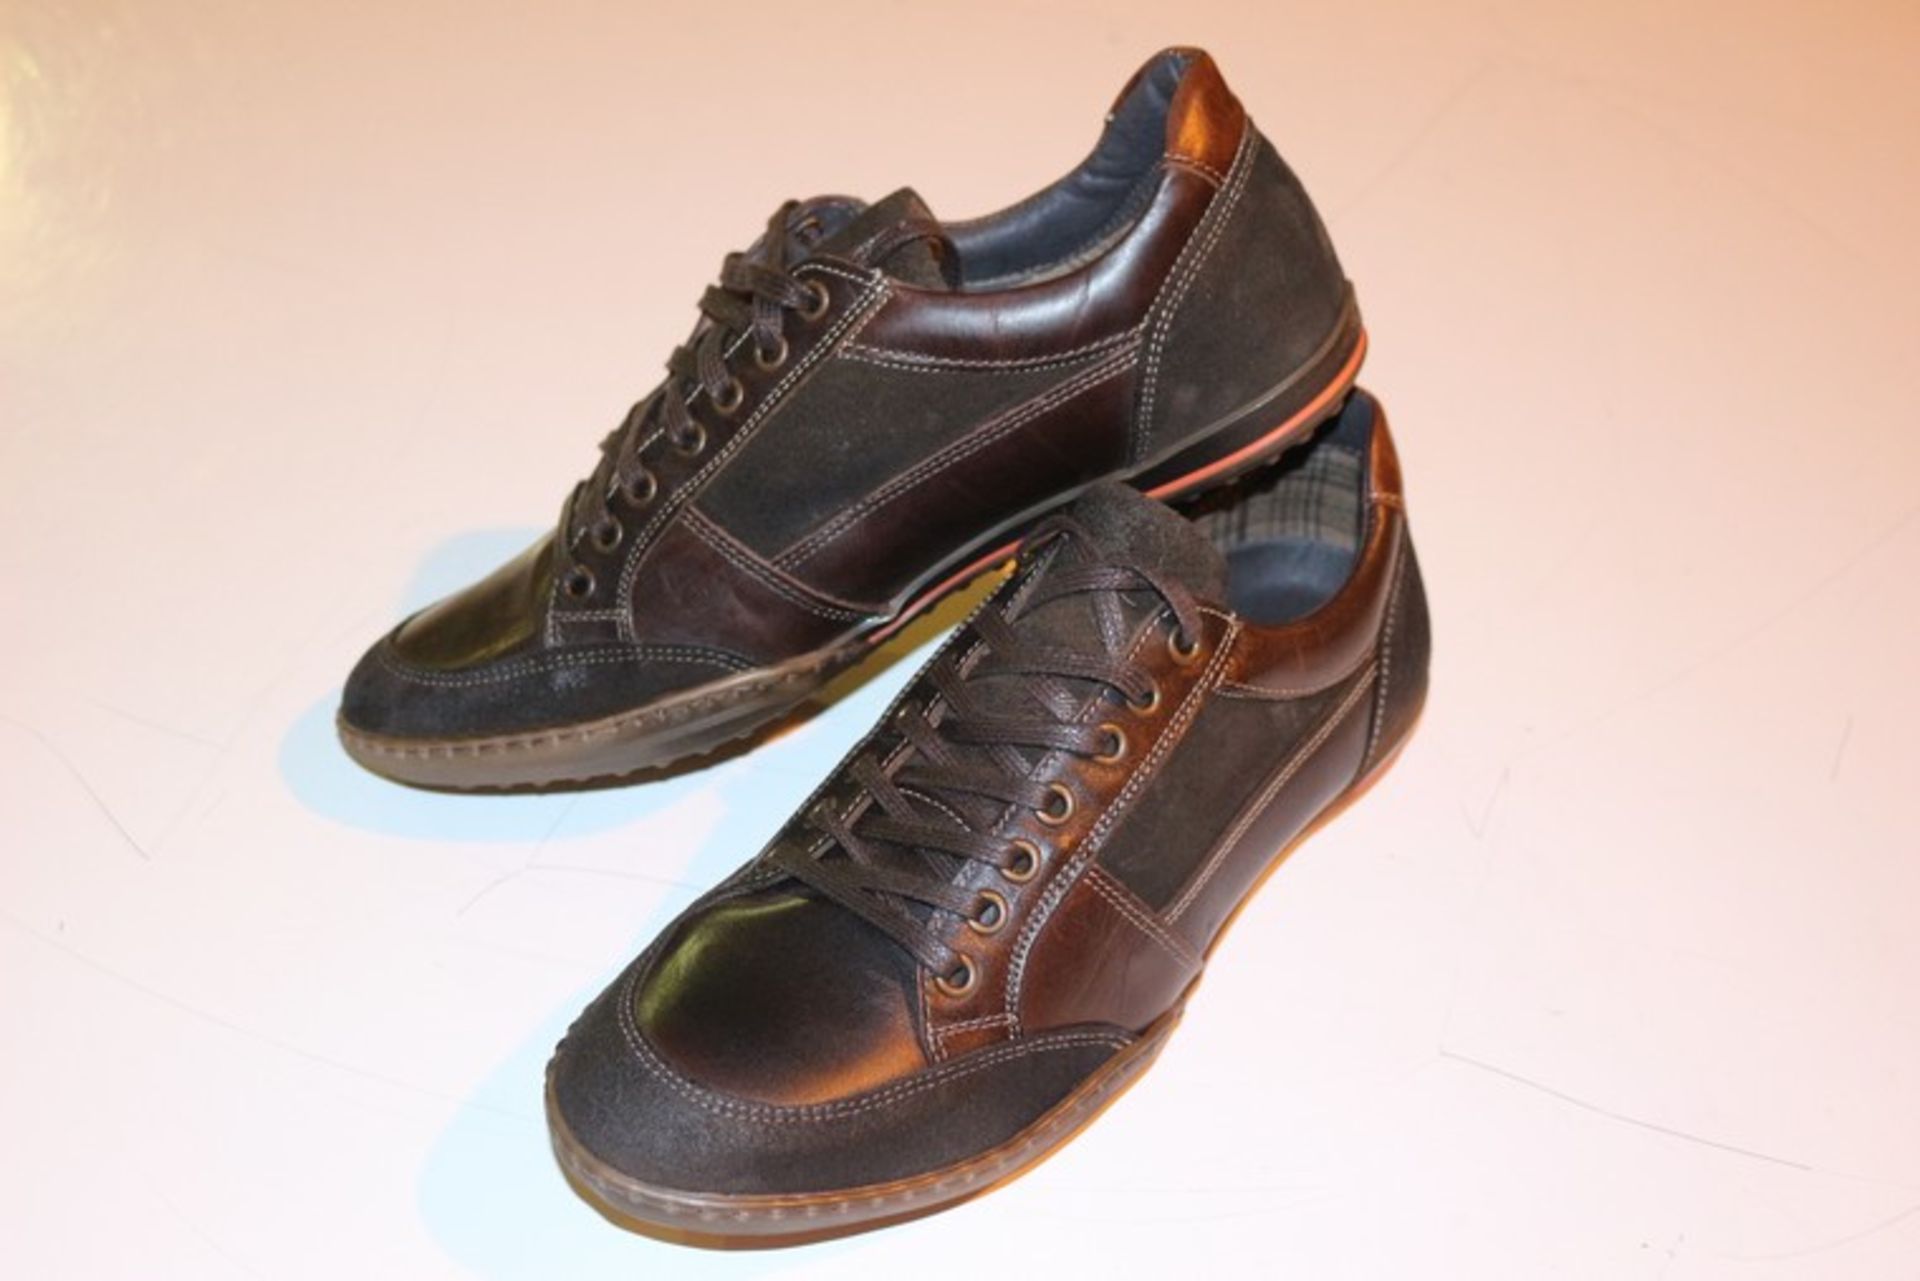 1 x BOXED PAIR OF DUNE SIZE 7 TITAN LEATHER GENTS DESIGNER SHOES *PLEASE NOTE THAT THE BID PRICE